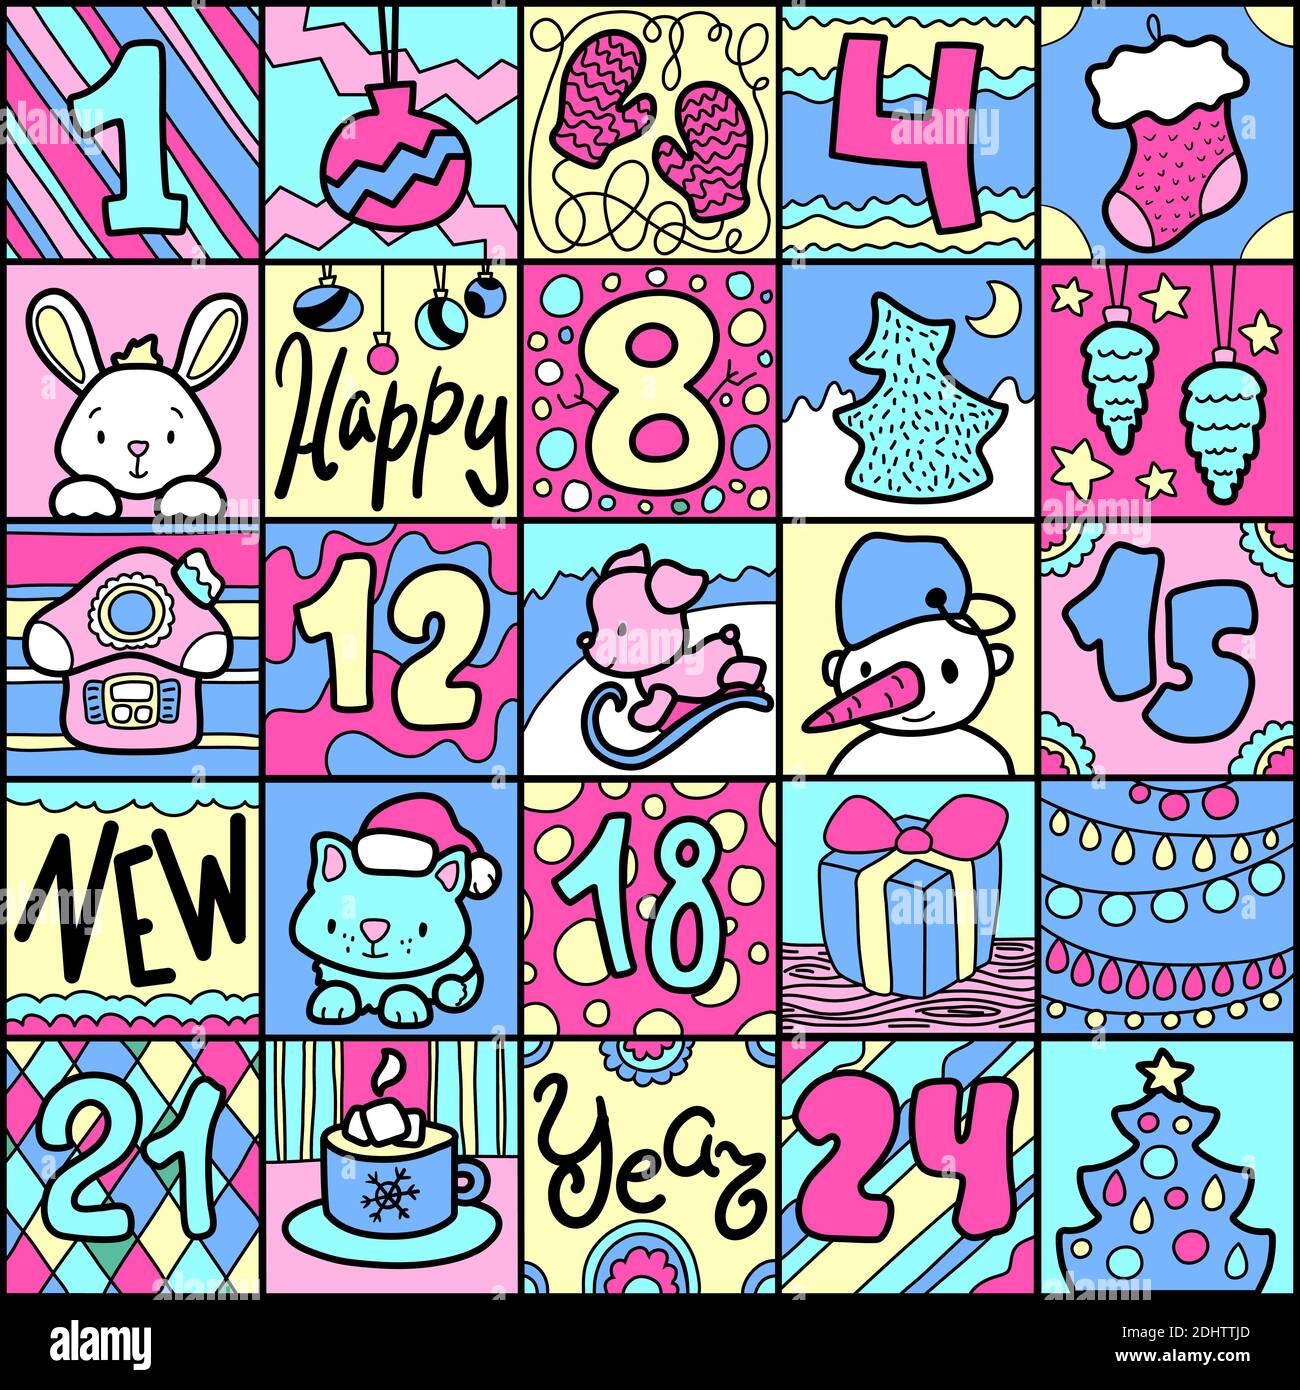 Cute doodle advent calendar with funny animals, square format for 25 days. Pink violet advent calendar for kids. Square calendar with New Year decor. Stock Vector